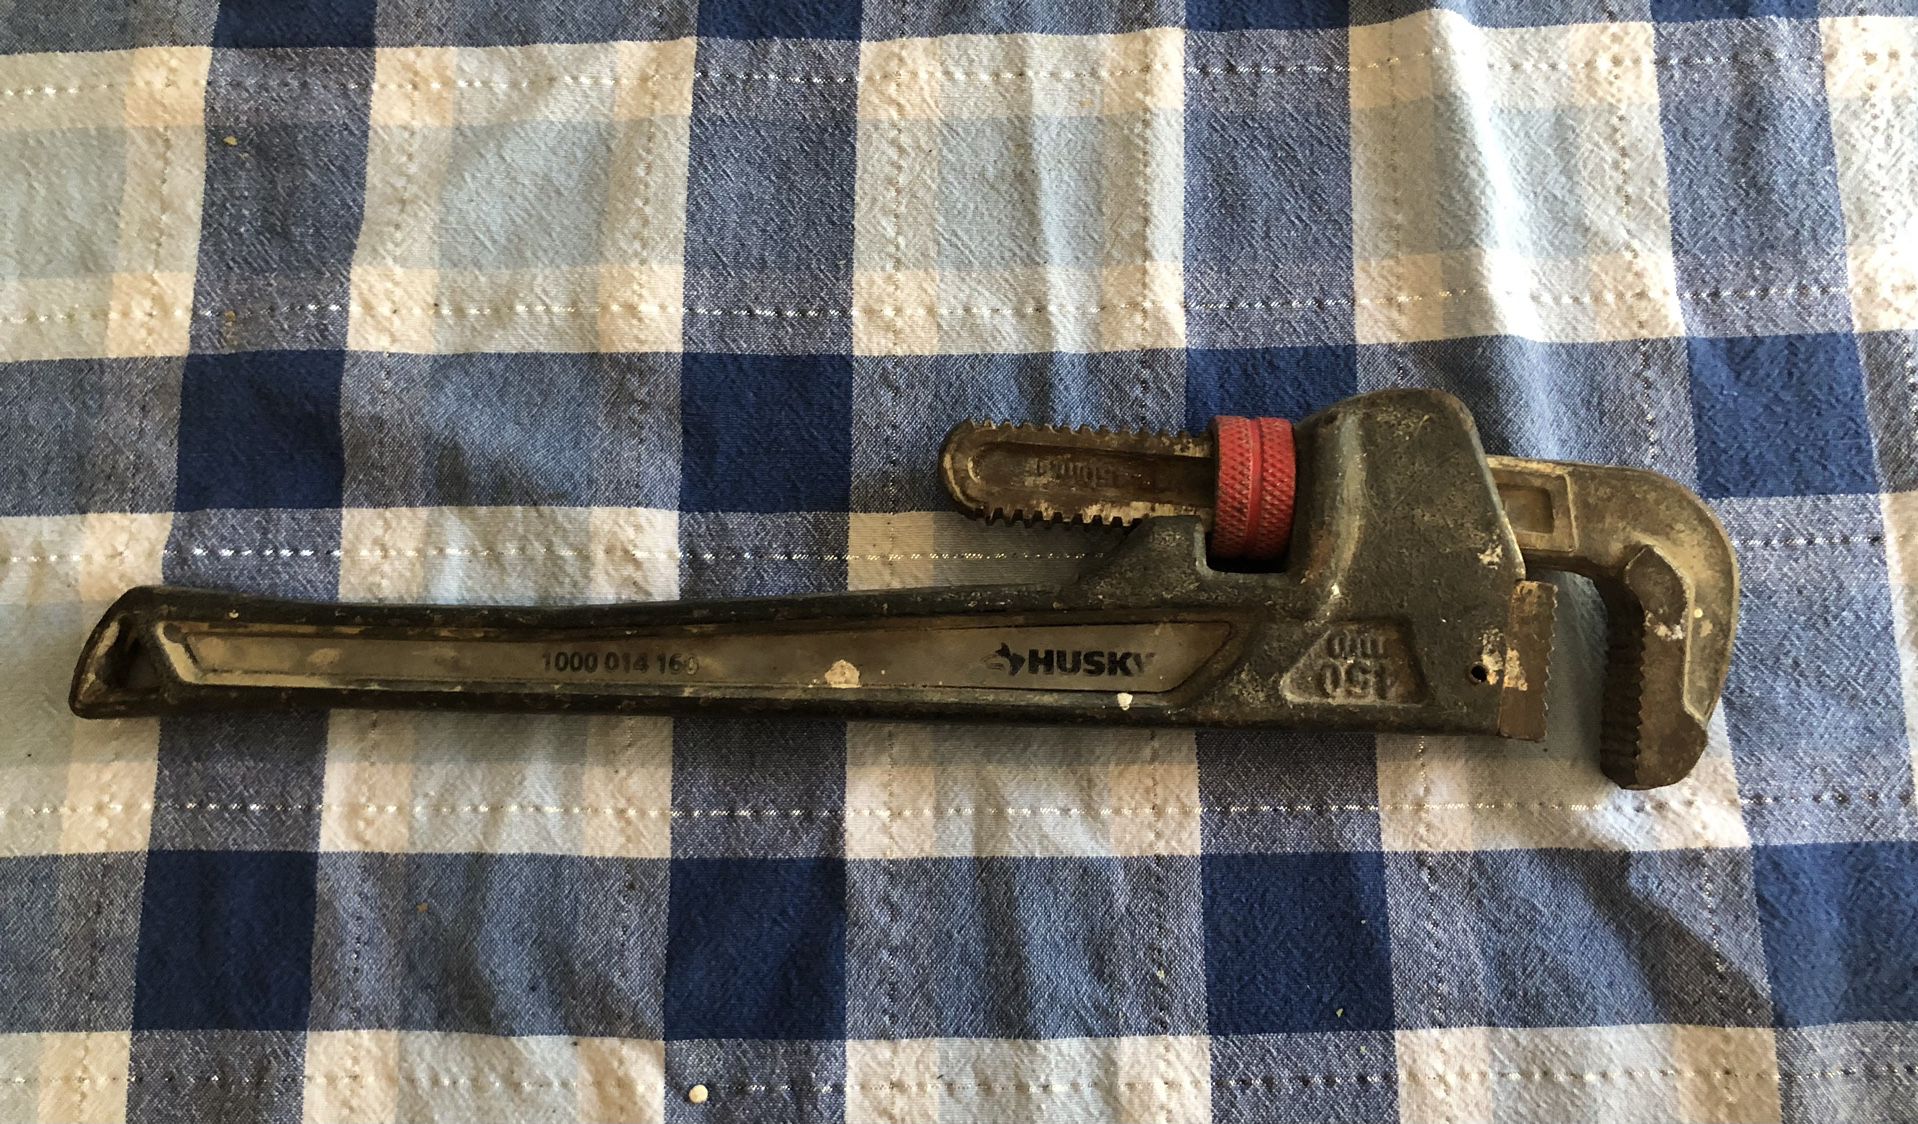 Husky 16” Pipe Wrench